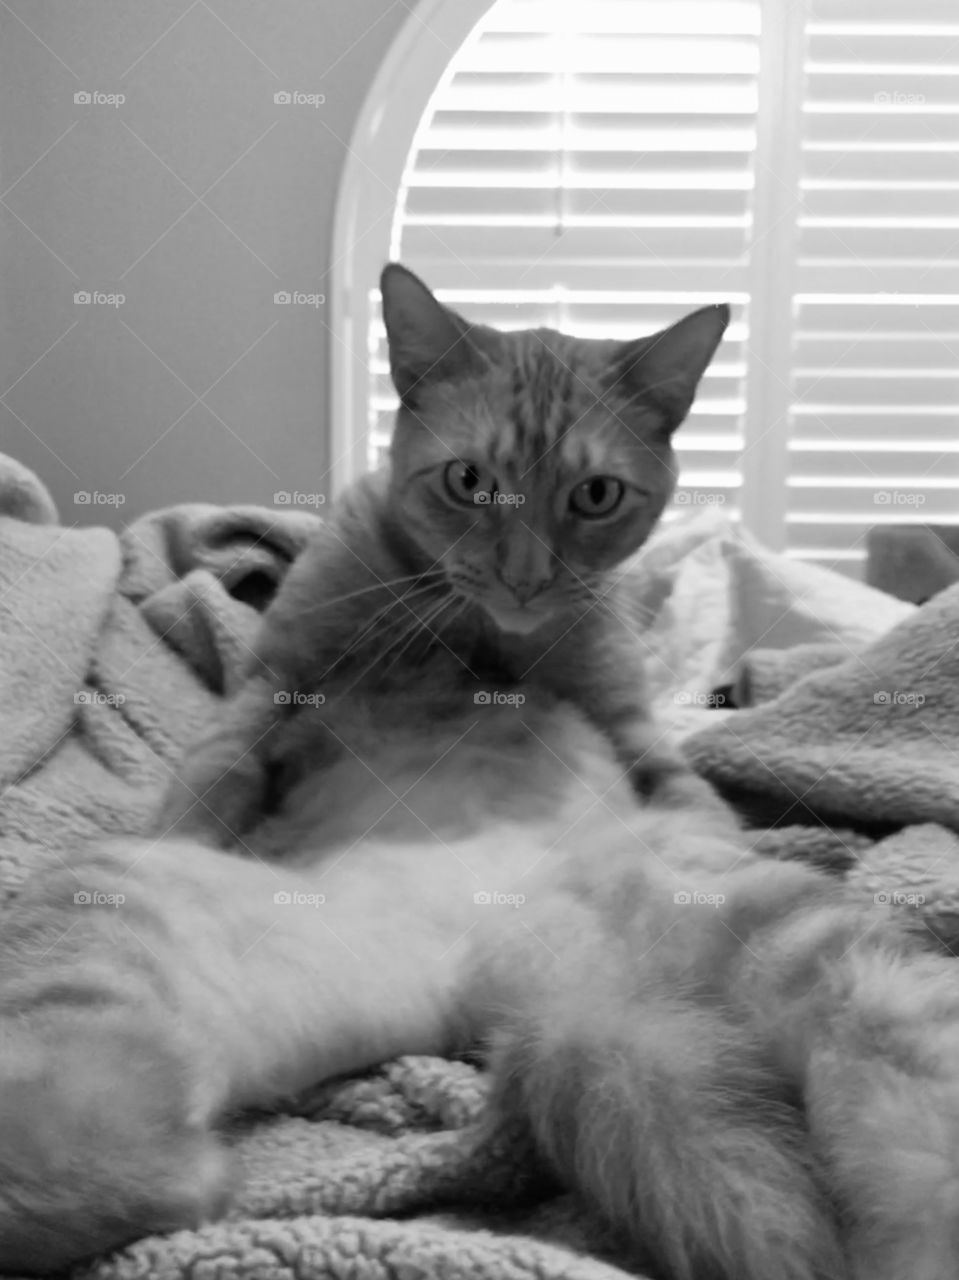 My cat sitting like a person in black and white 